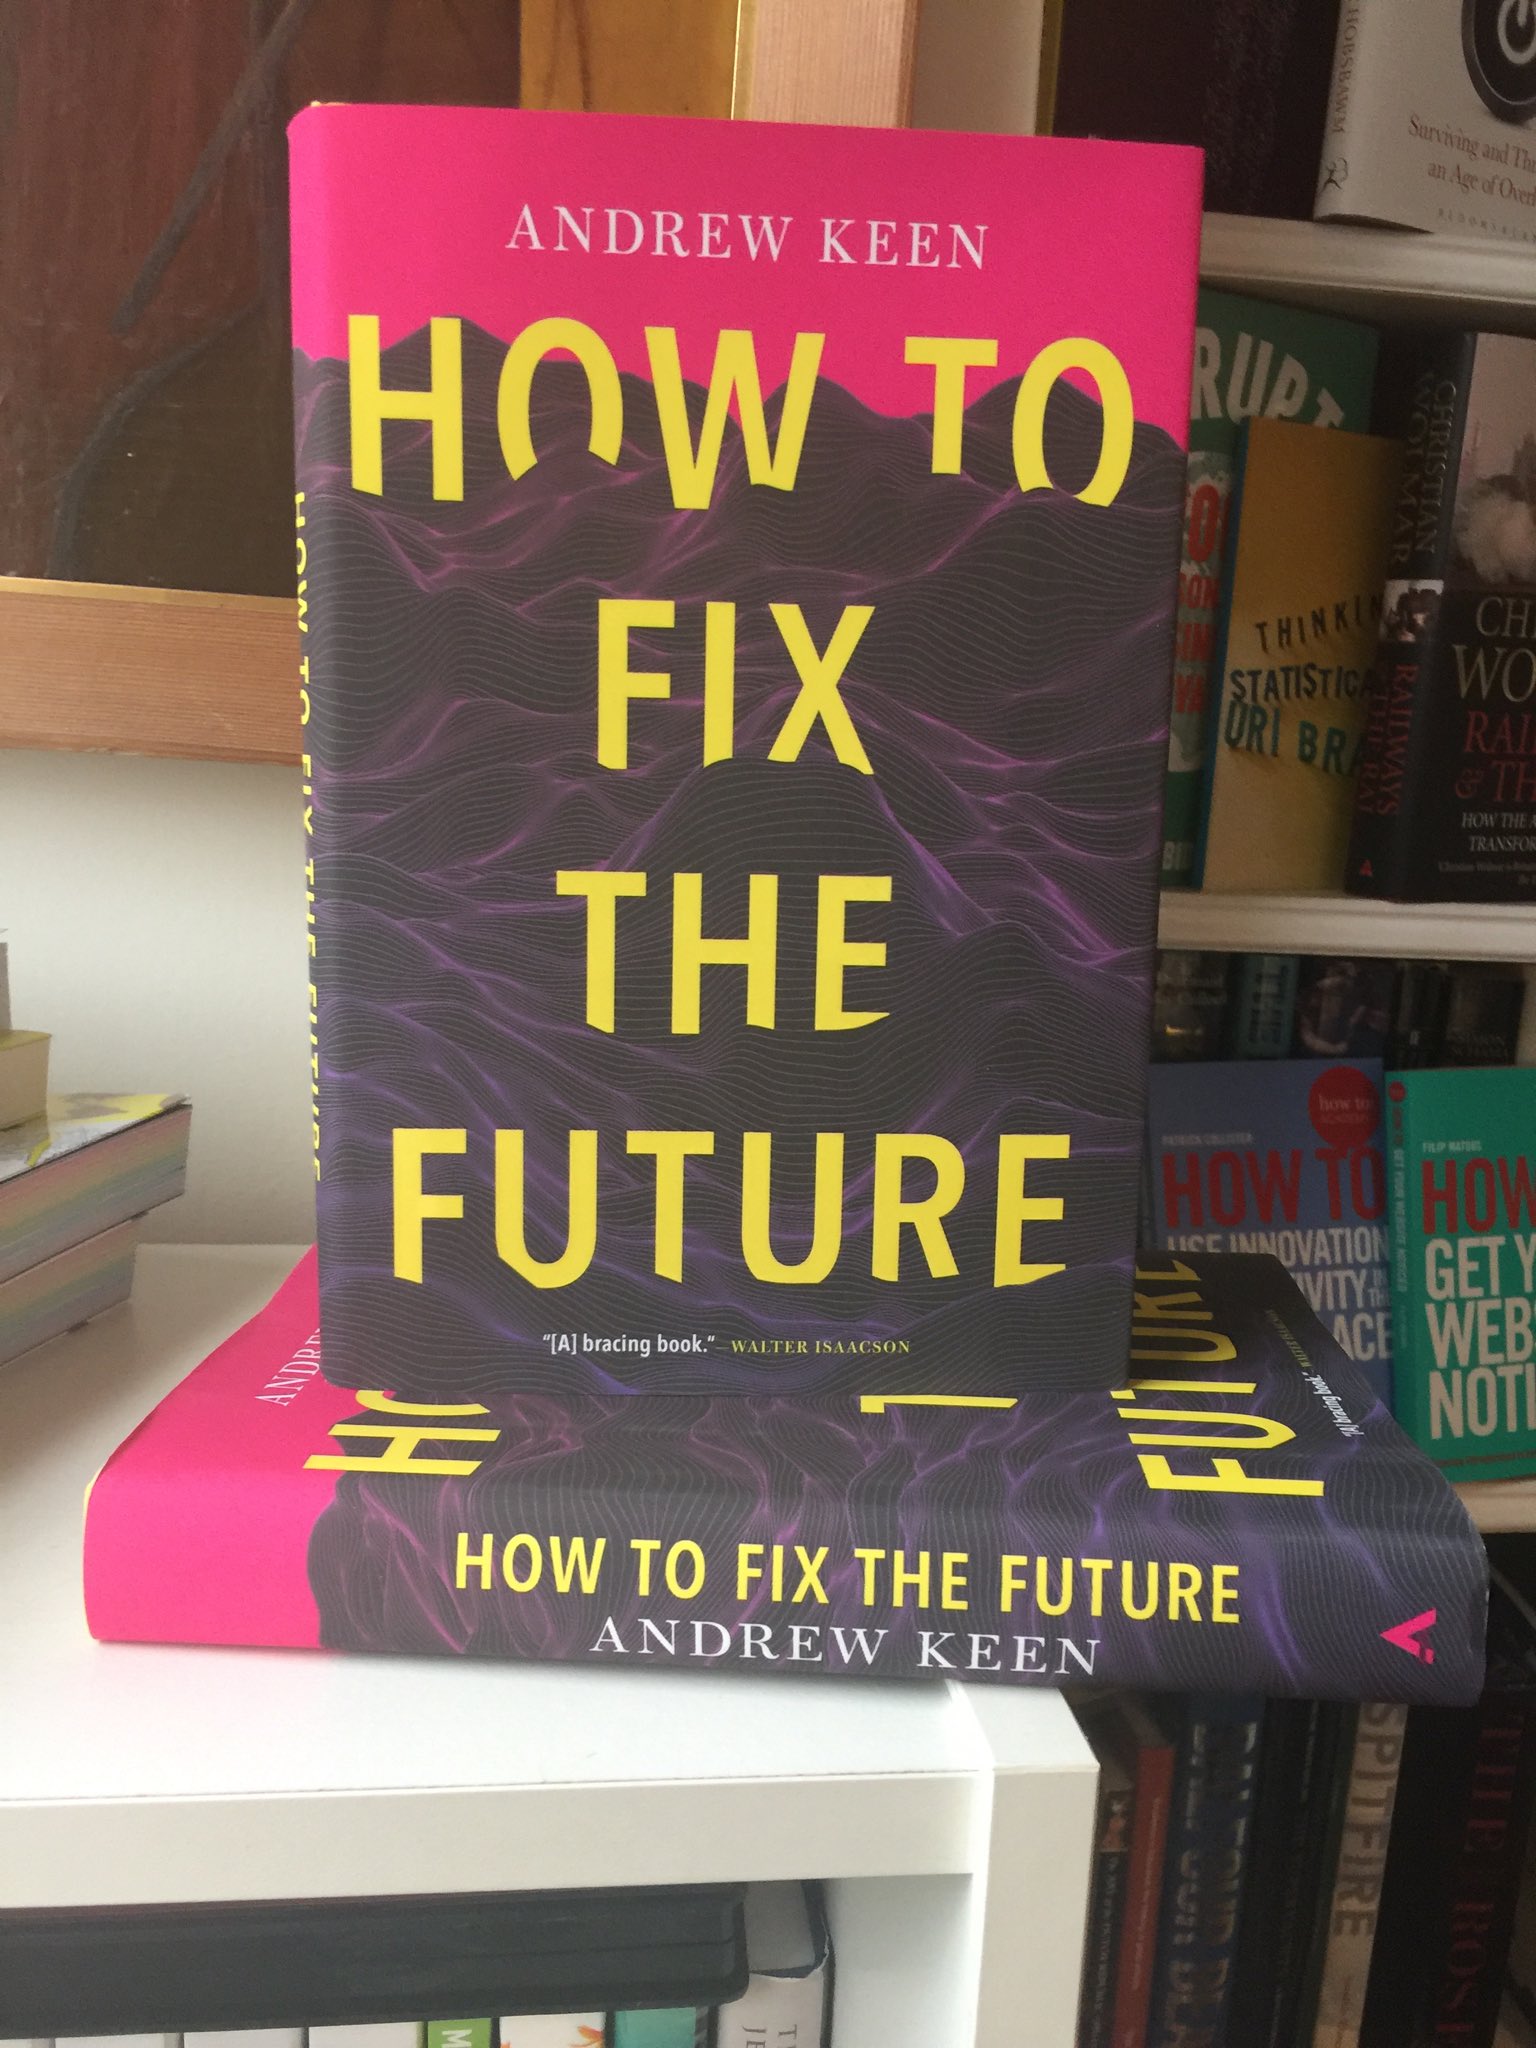 My Summer Lair Chapter 73 Andrew Keen (How to Fix the Future)